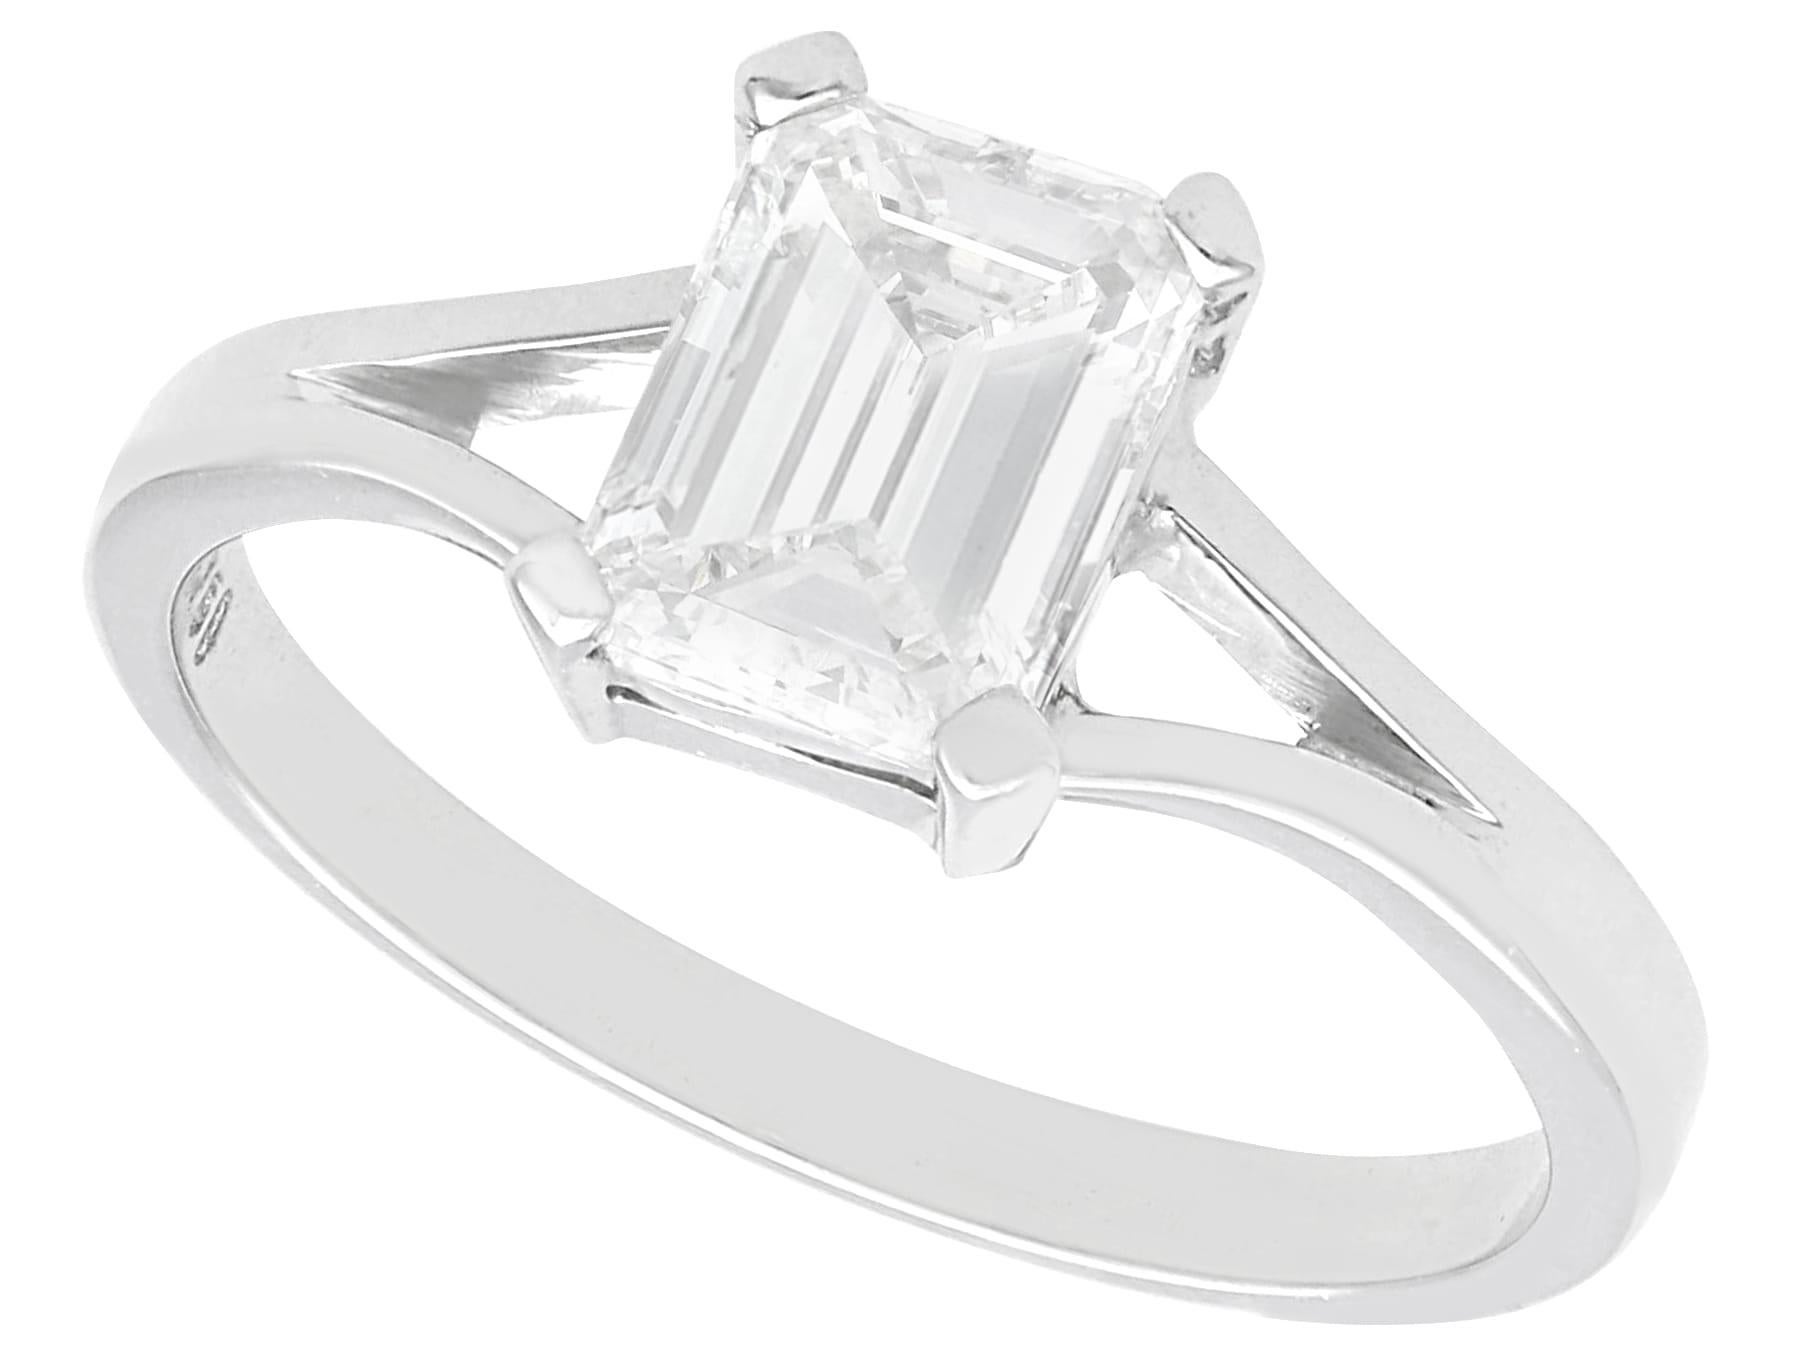 A stunning, fine and impressive vintage 1.21 carat emerald cut diamond solitaire ring in platinum; part of our vintage engagement ring collections

This fine and impressive vintage engagement ring has been crafted in 18 karat white gold.

The